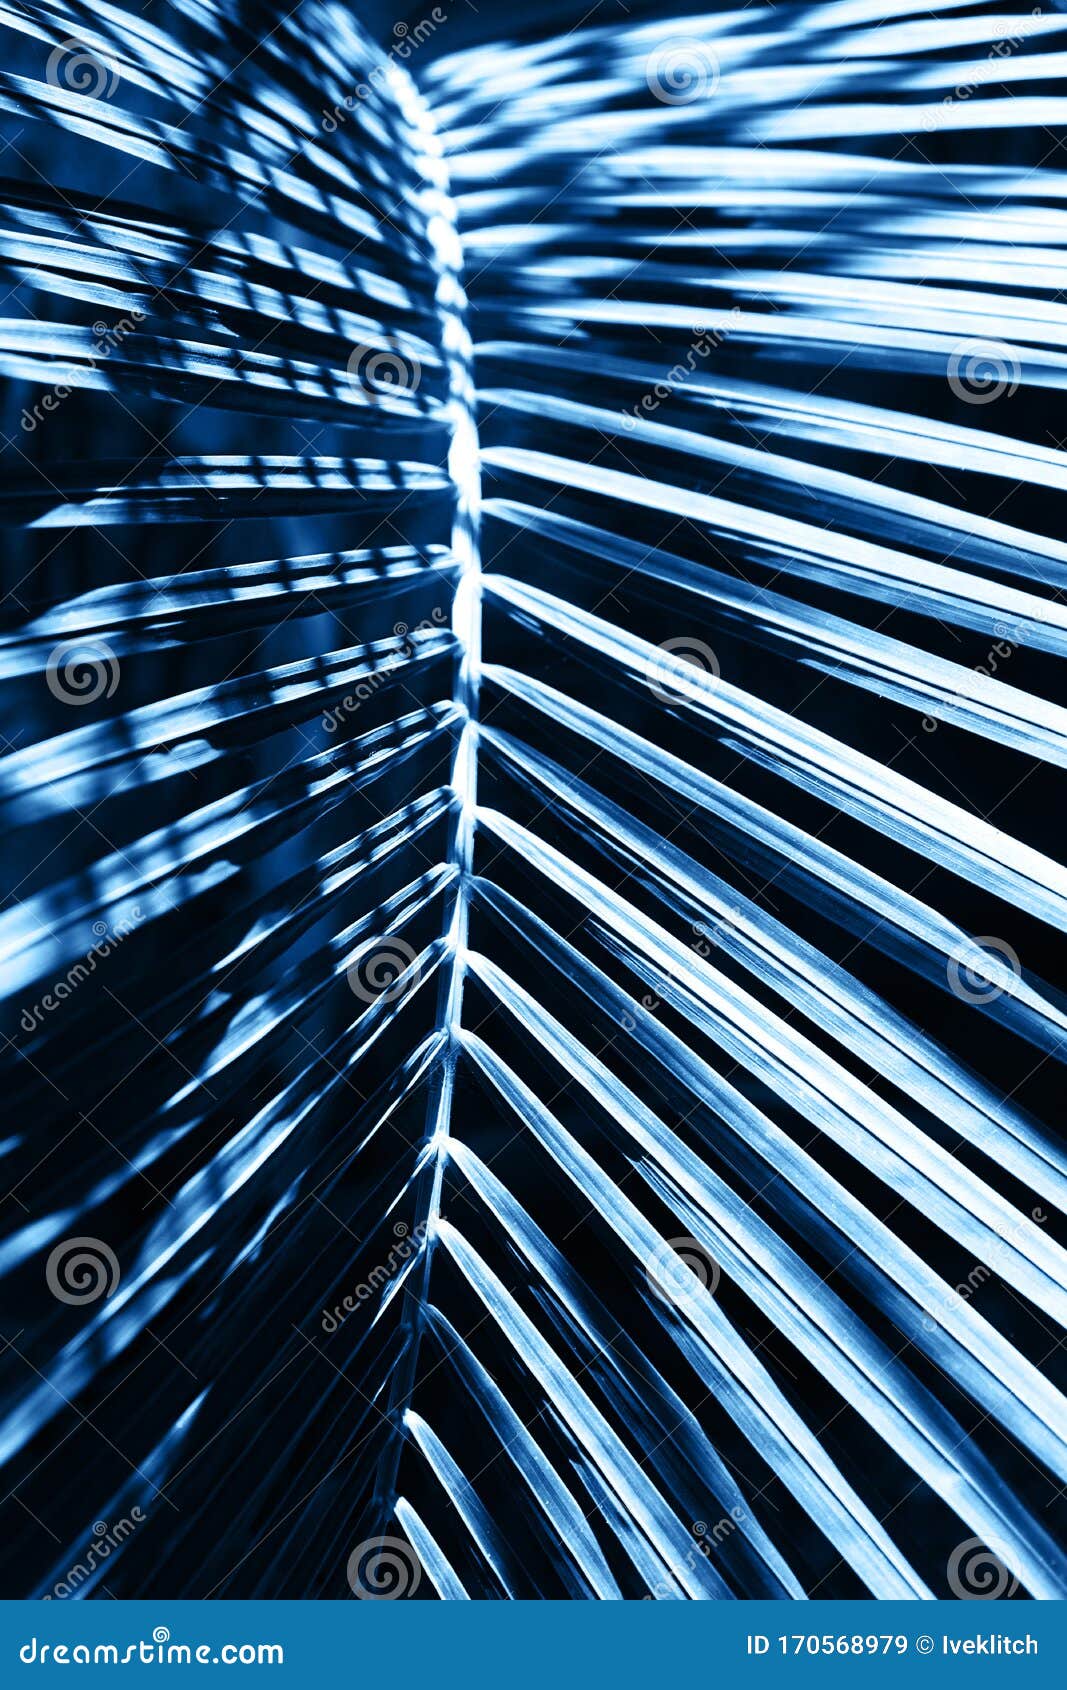 Tropical Palm Leaf on Colorful Classic Blue Background. Stock Image